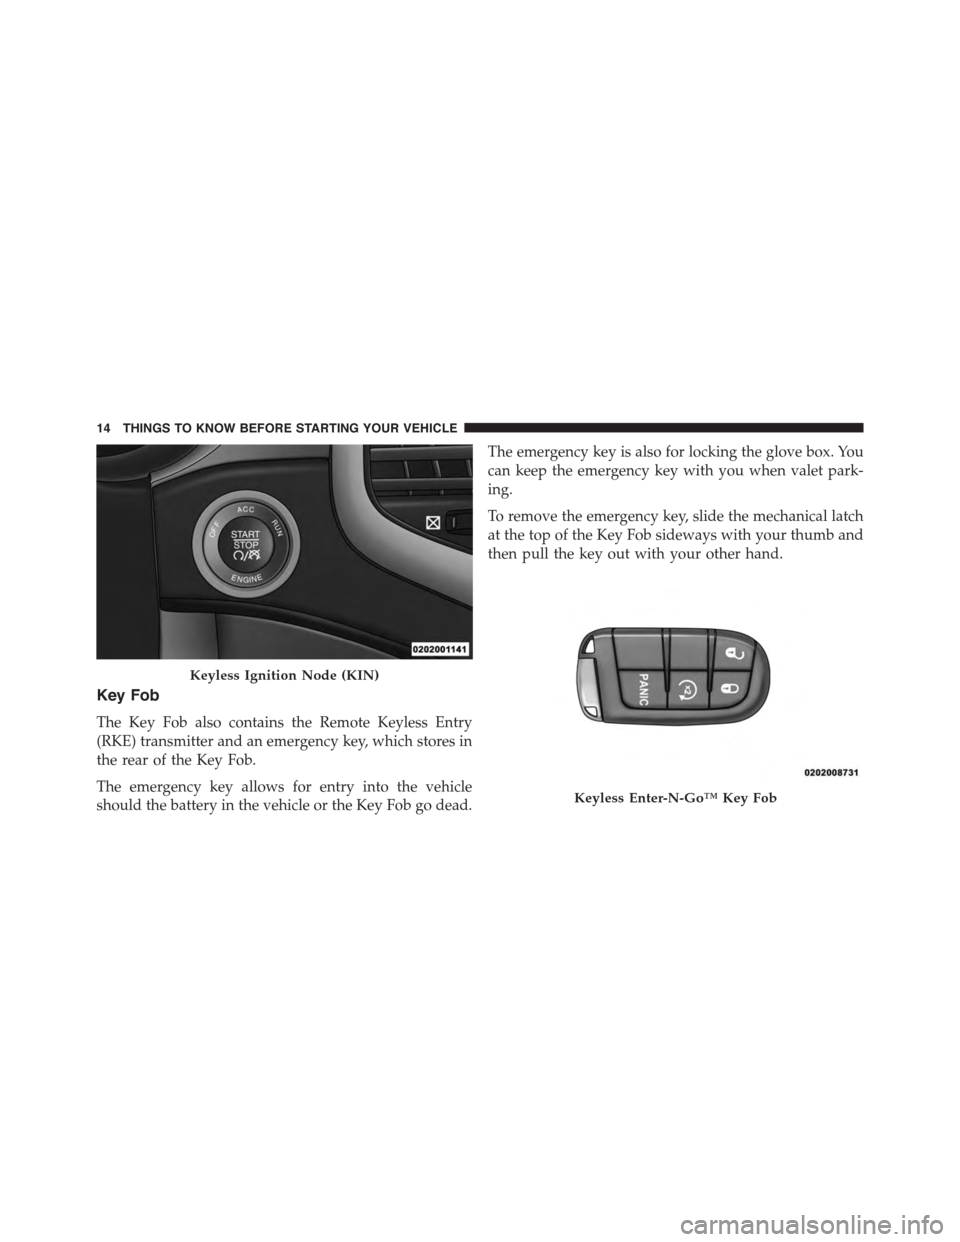 DODGE DURANGO 2015 3.G Owners Manual Key Fob
The Key Fob also contains the Remote Keyless Entry
(RKE) transmitter and an emergency key, which stores in
the rear of the Key Fob.
The emergency key allows for entry into the vehicle
should t